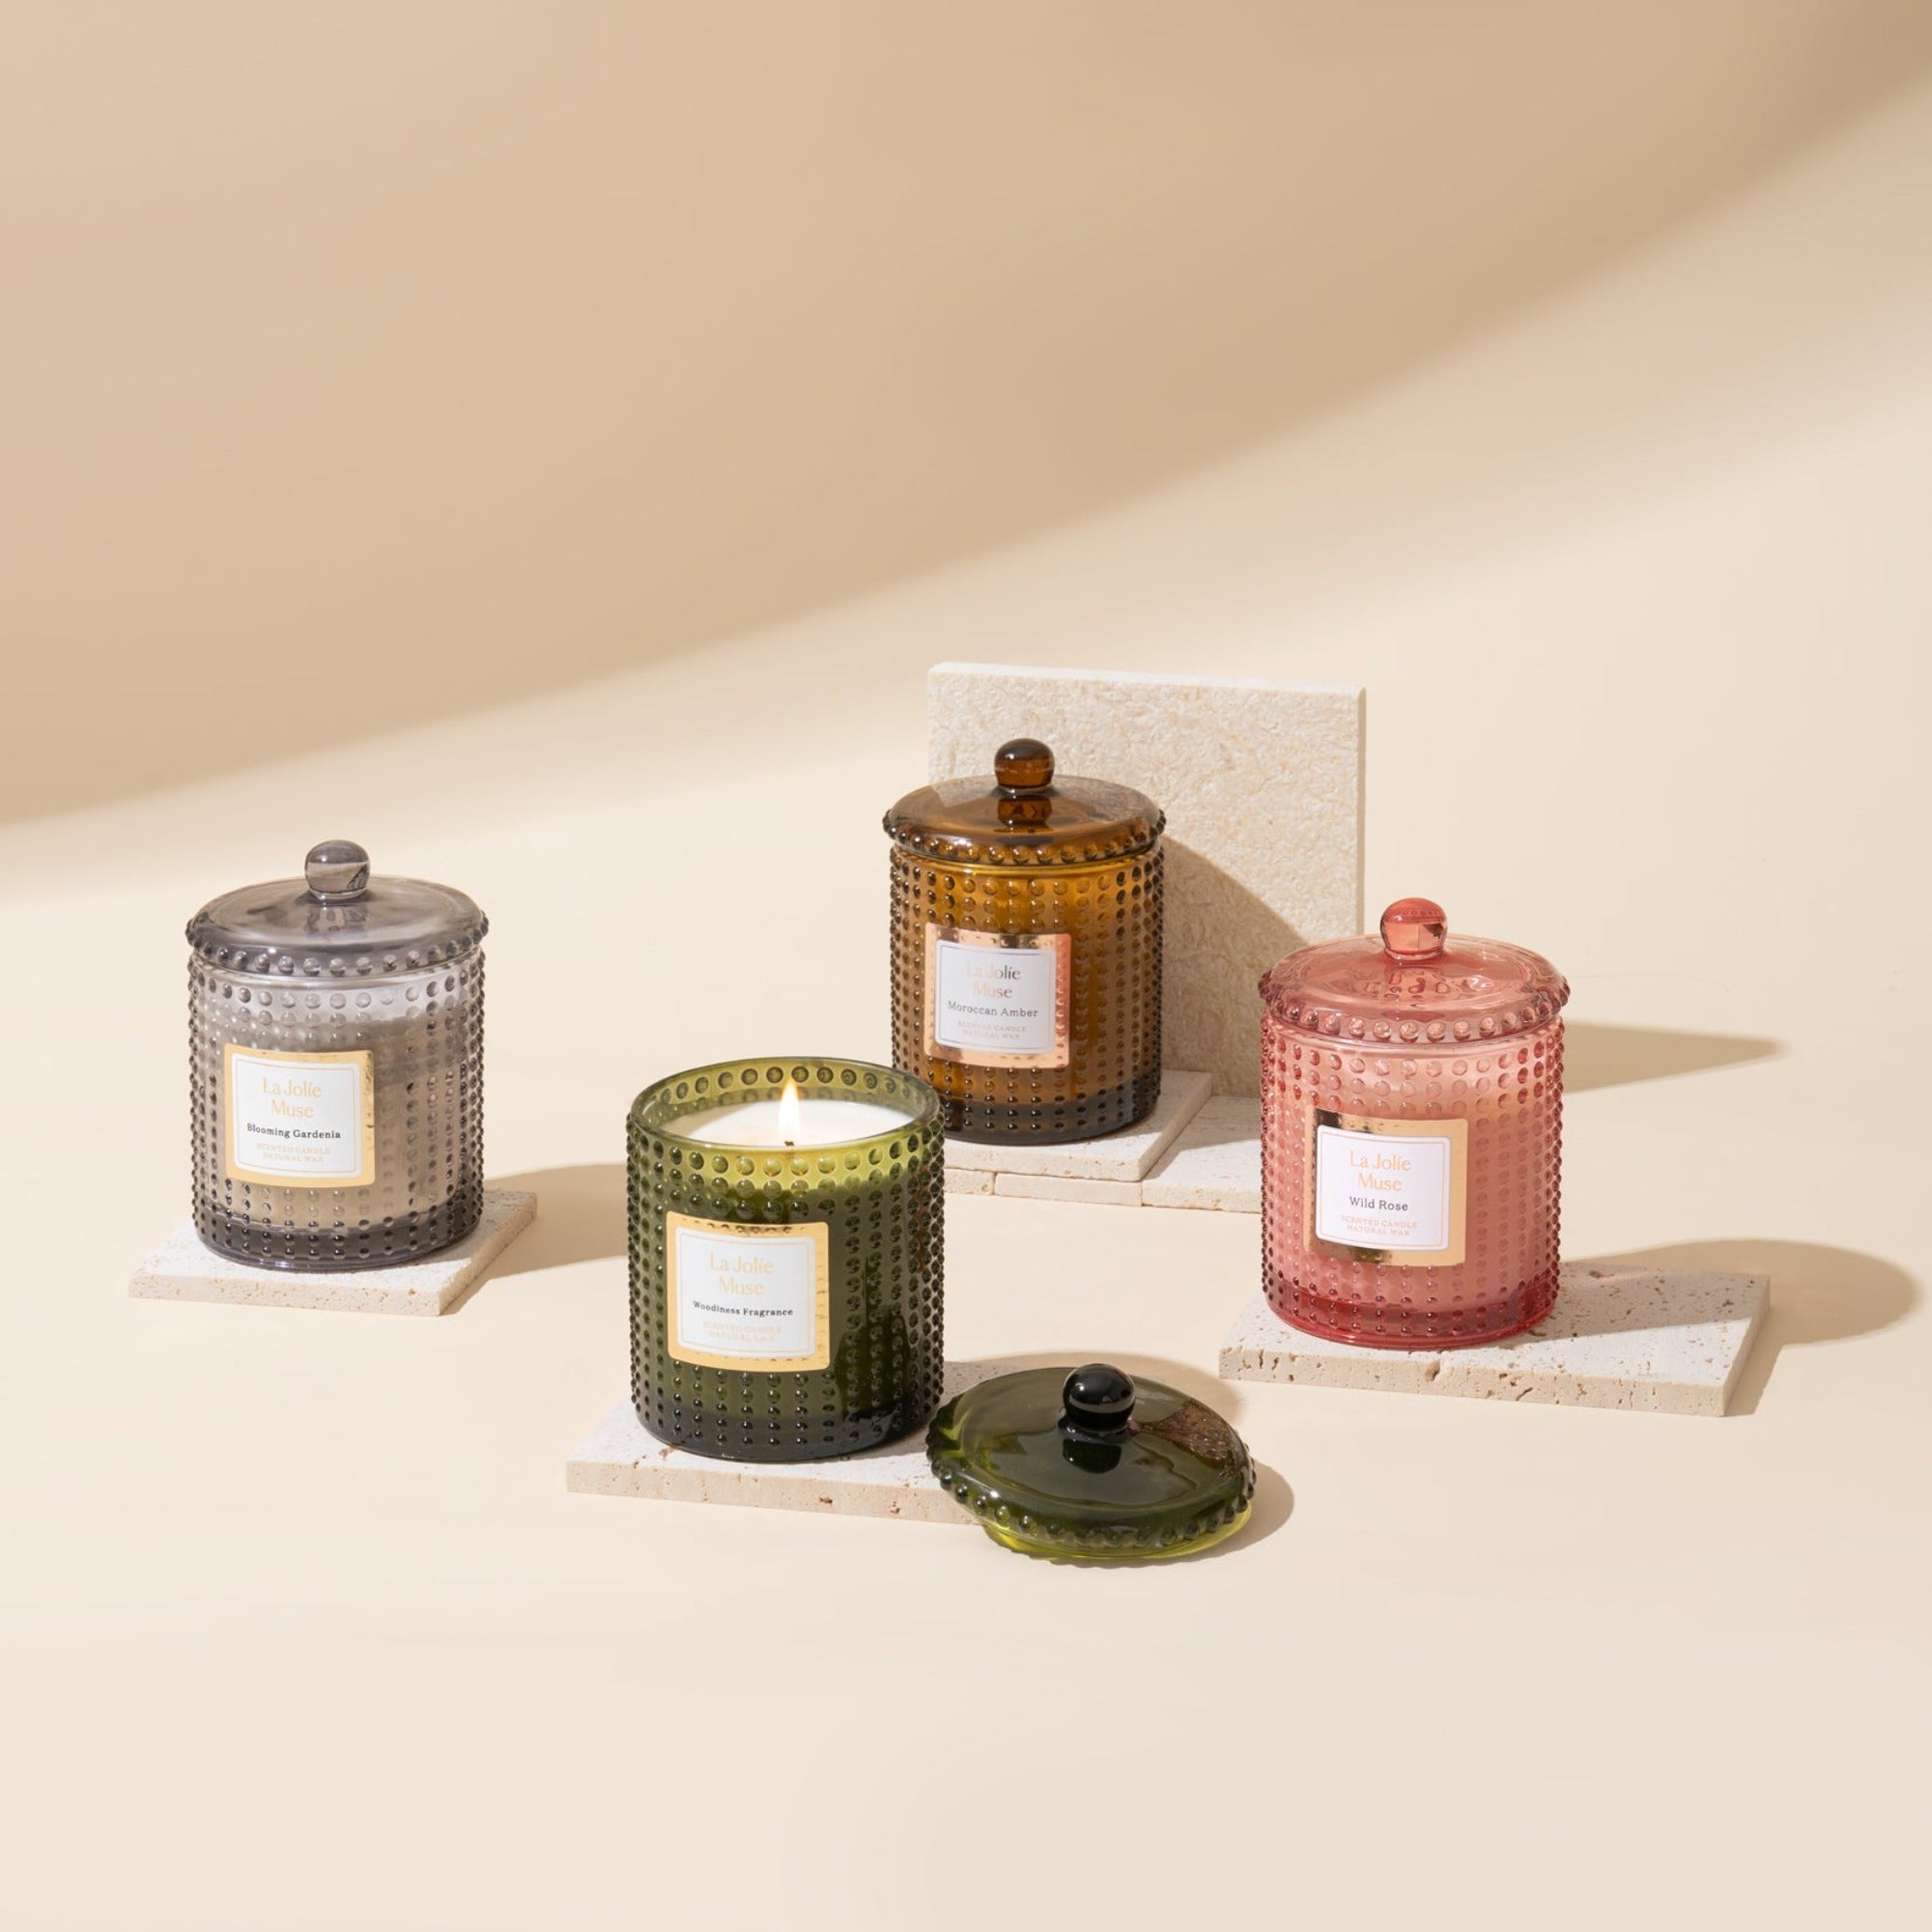 Collection shot of Marvella candles with four different scents placed in a scattered arrangement